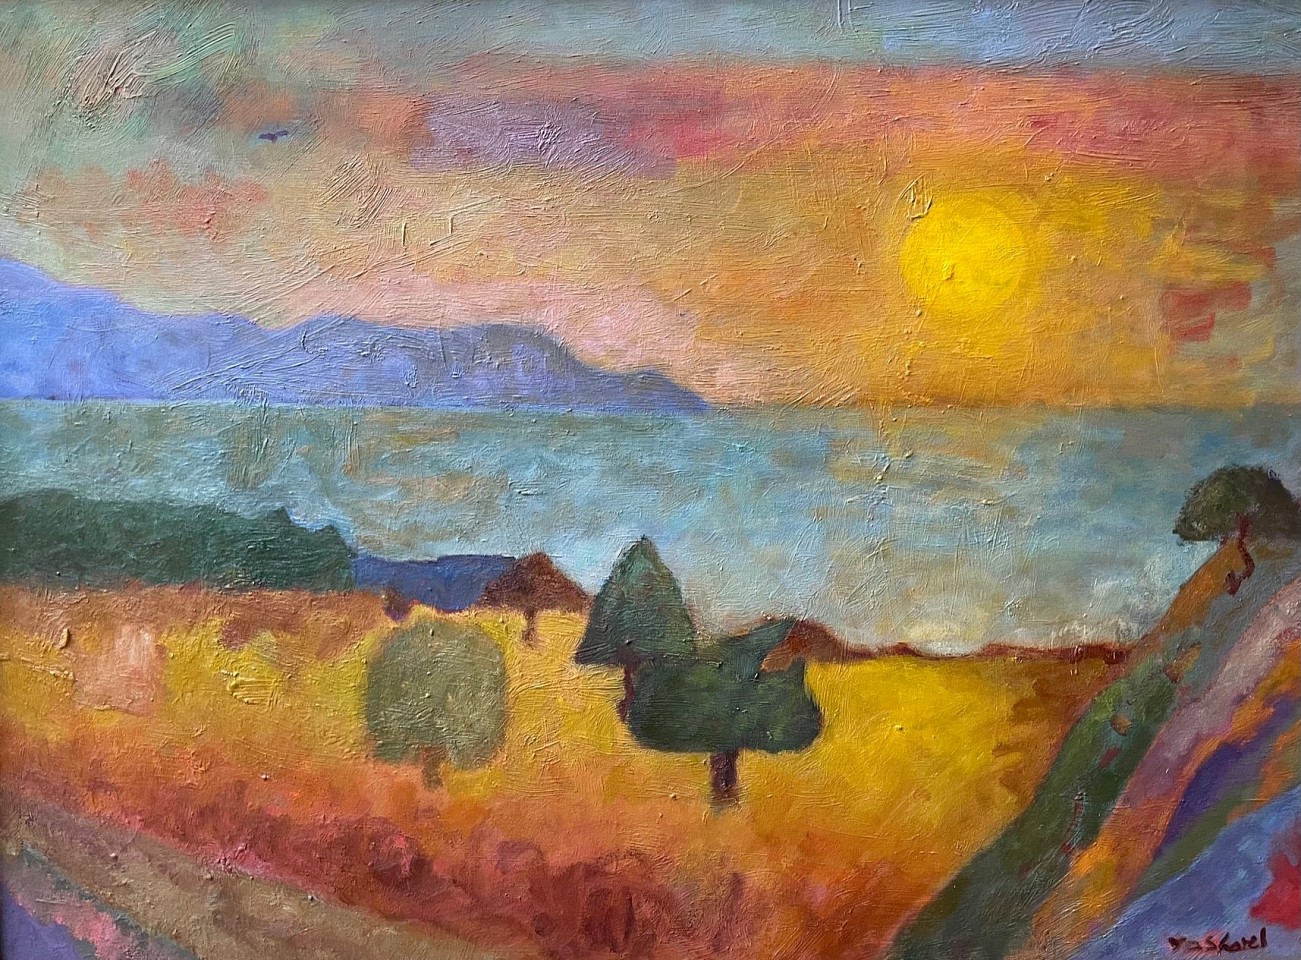 Yasharel Manzy, October Land , 2022
oil on canvas, 30"x 40", 36"x46" framed
YM 527
Price Upon Request